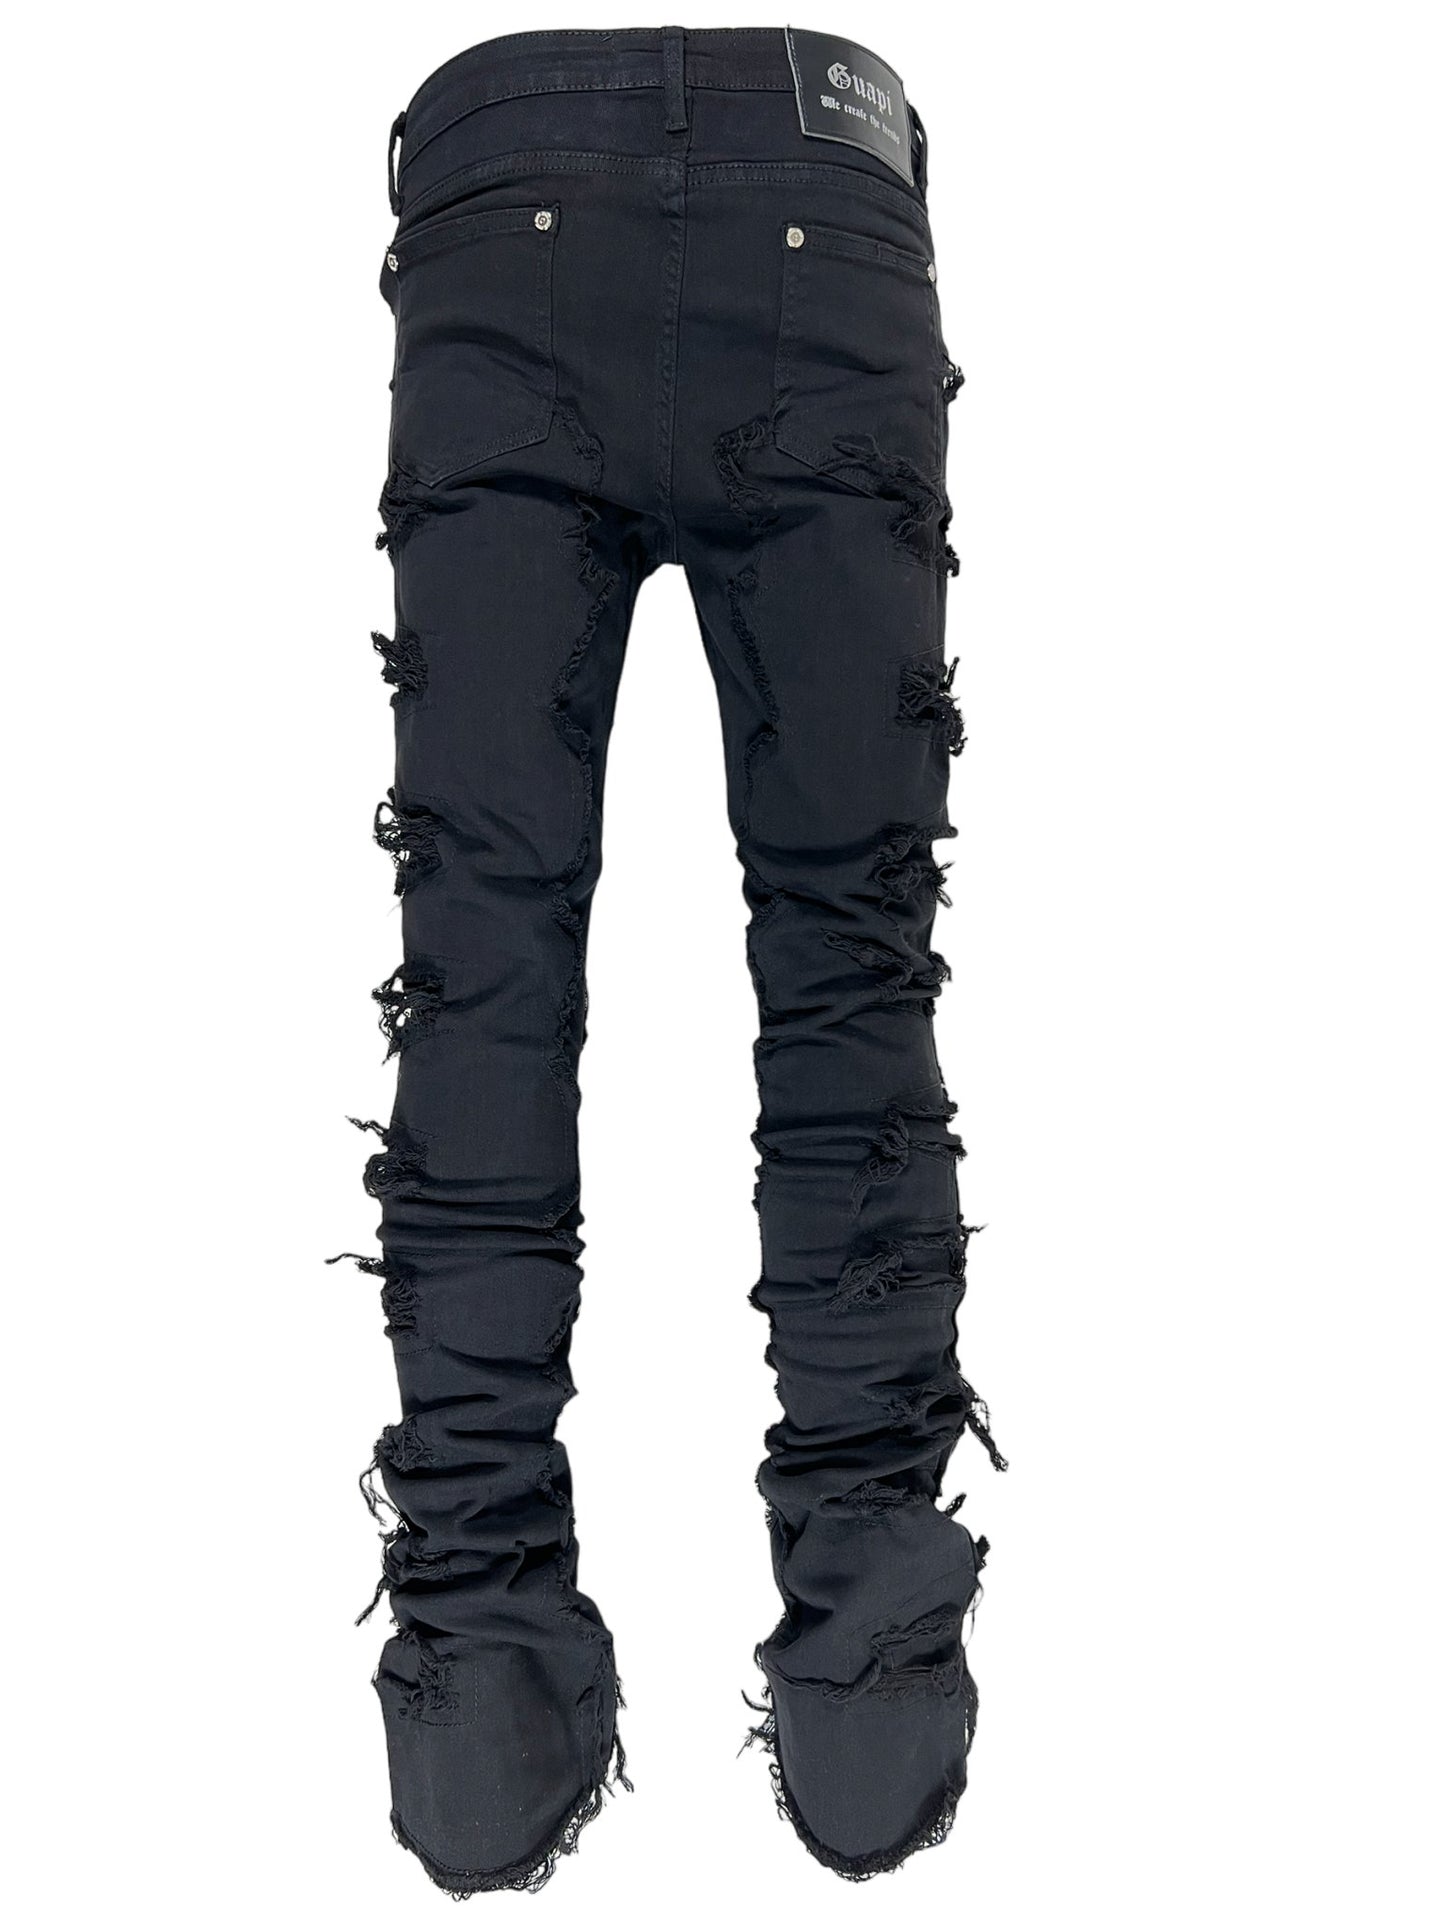 A pair of GUAPI OBSIDIAN BLACK BLOOD DIAMOND STACKED DENIM jeans with multiple rips and frayed edges, displayed against a white background.